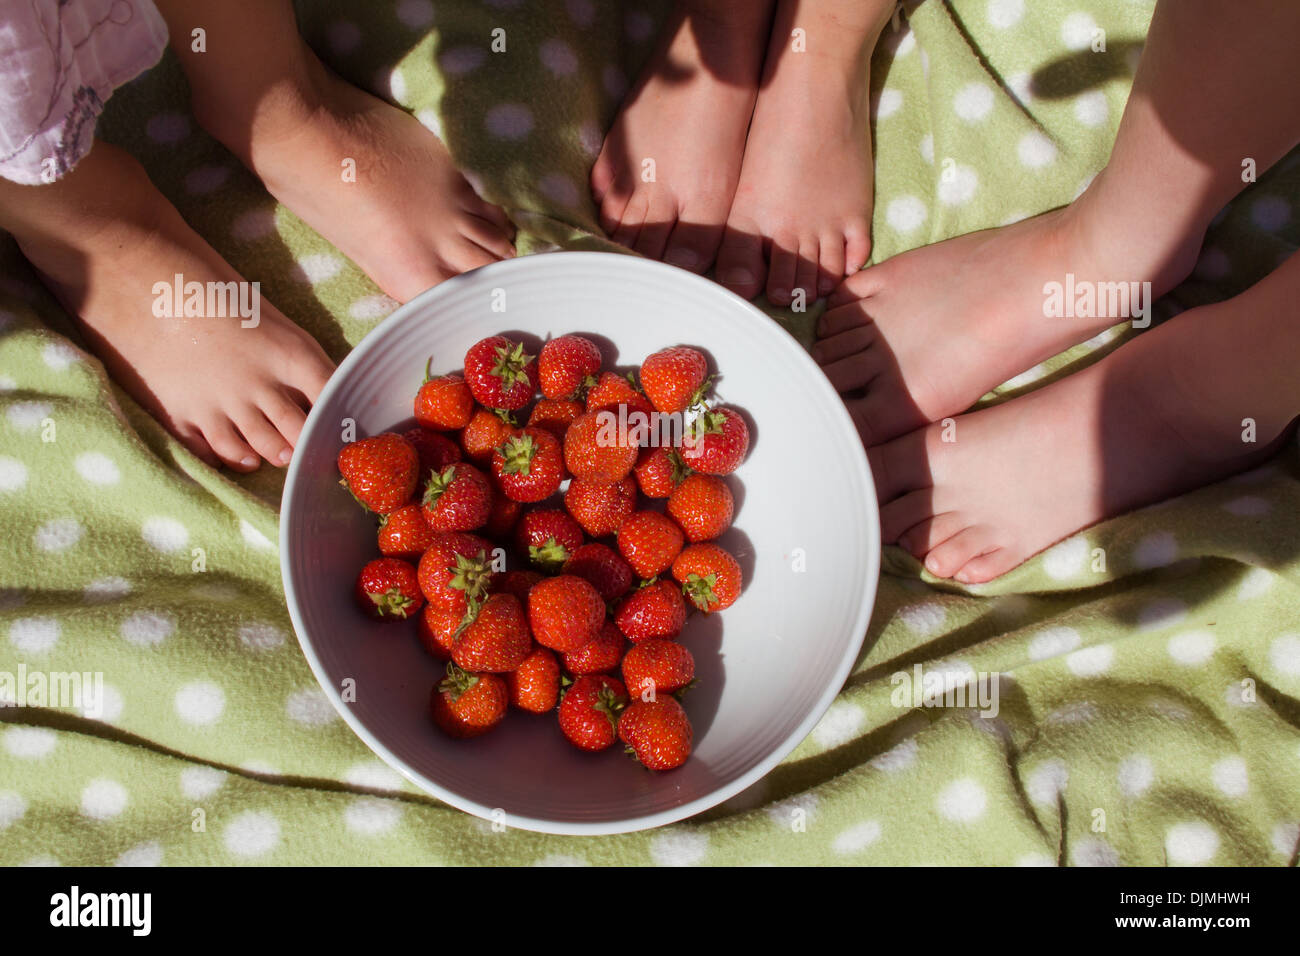 three girls feet standing next to a white bowl of strawberries, strawberry little pink toes in Somerset, UK. Stock Photo